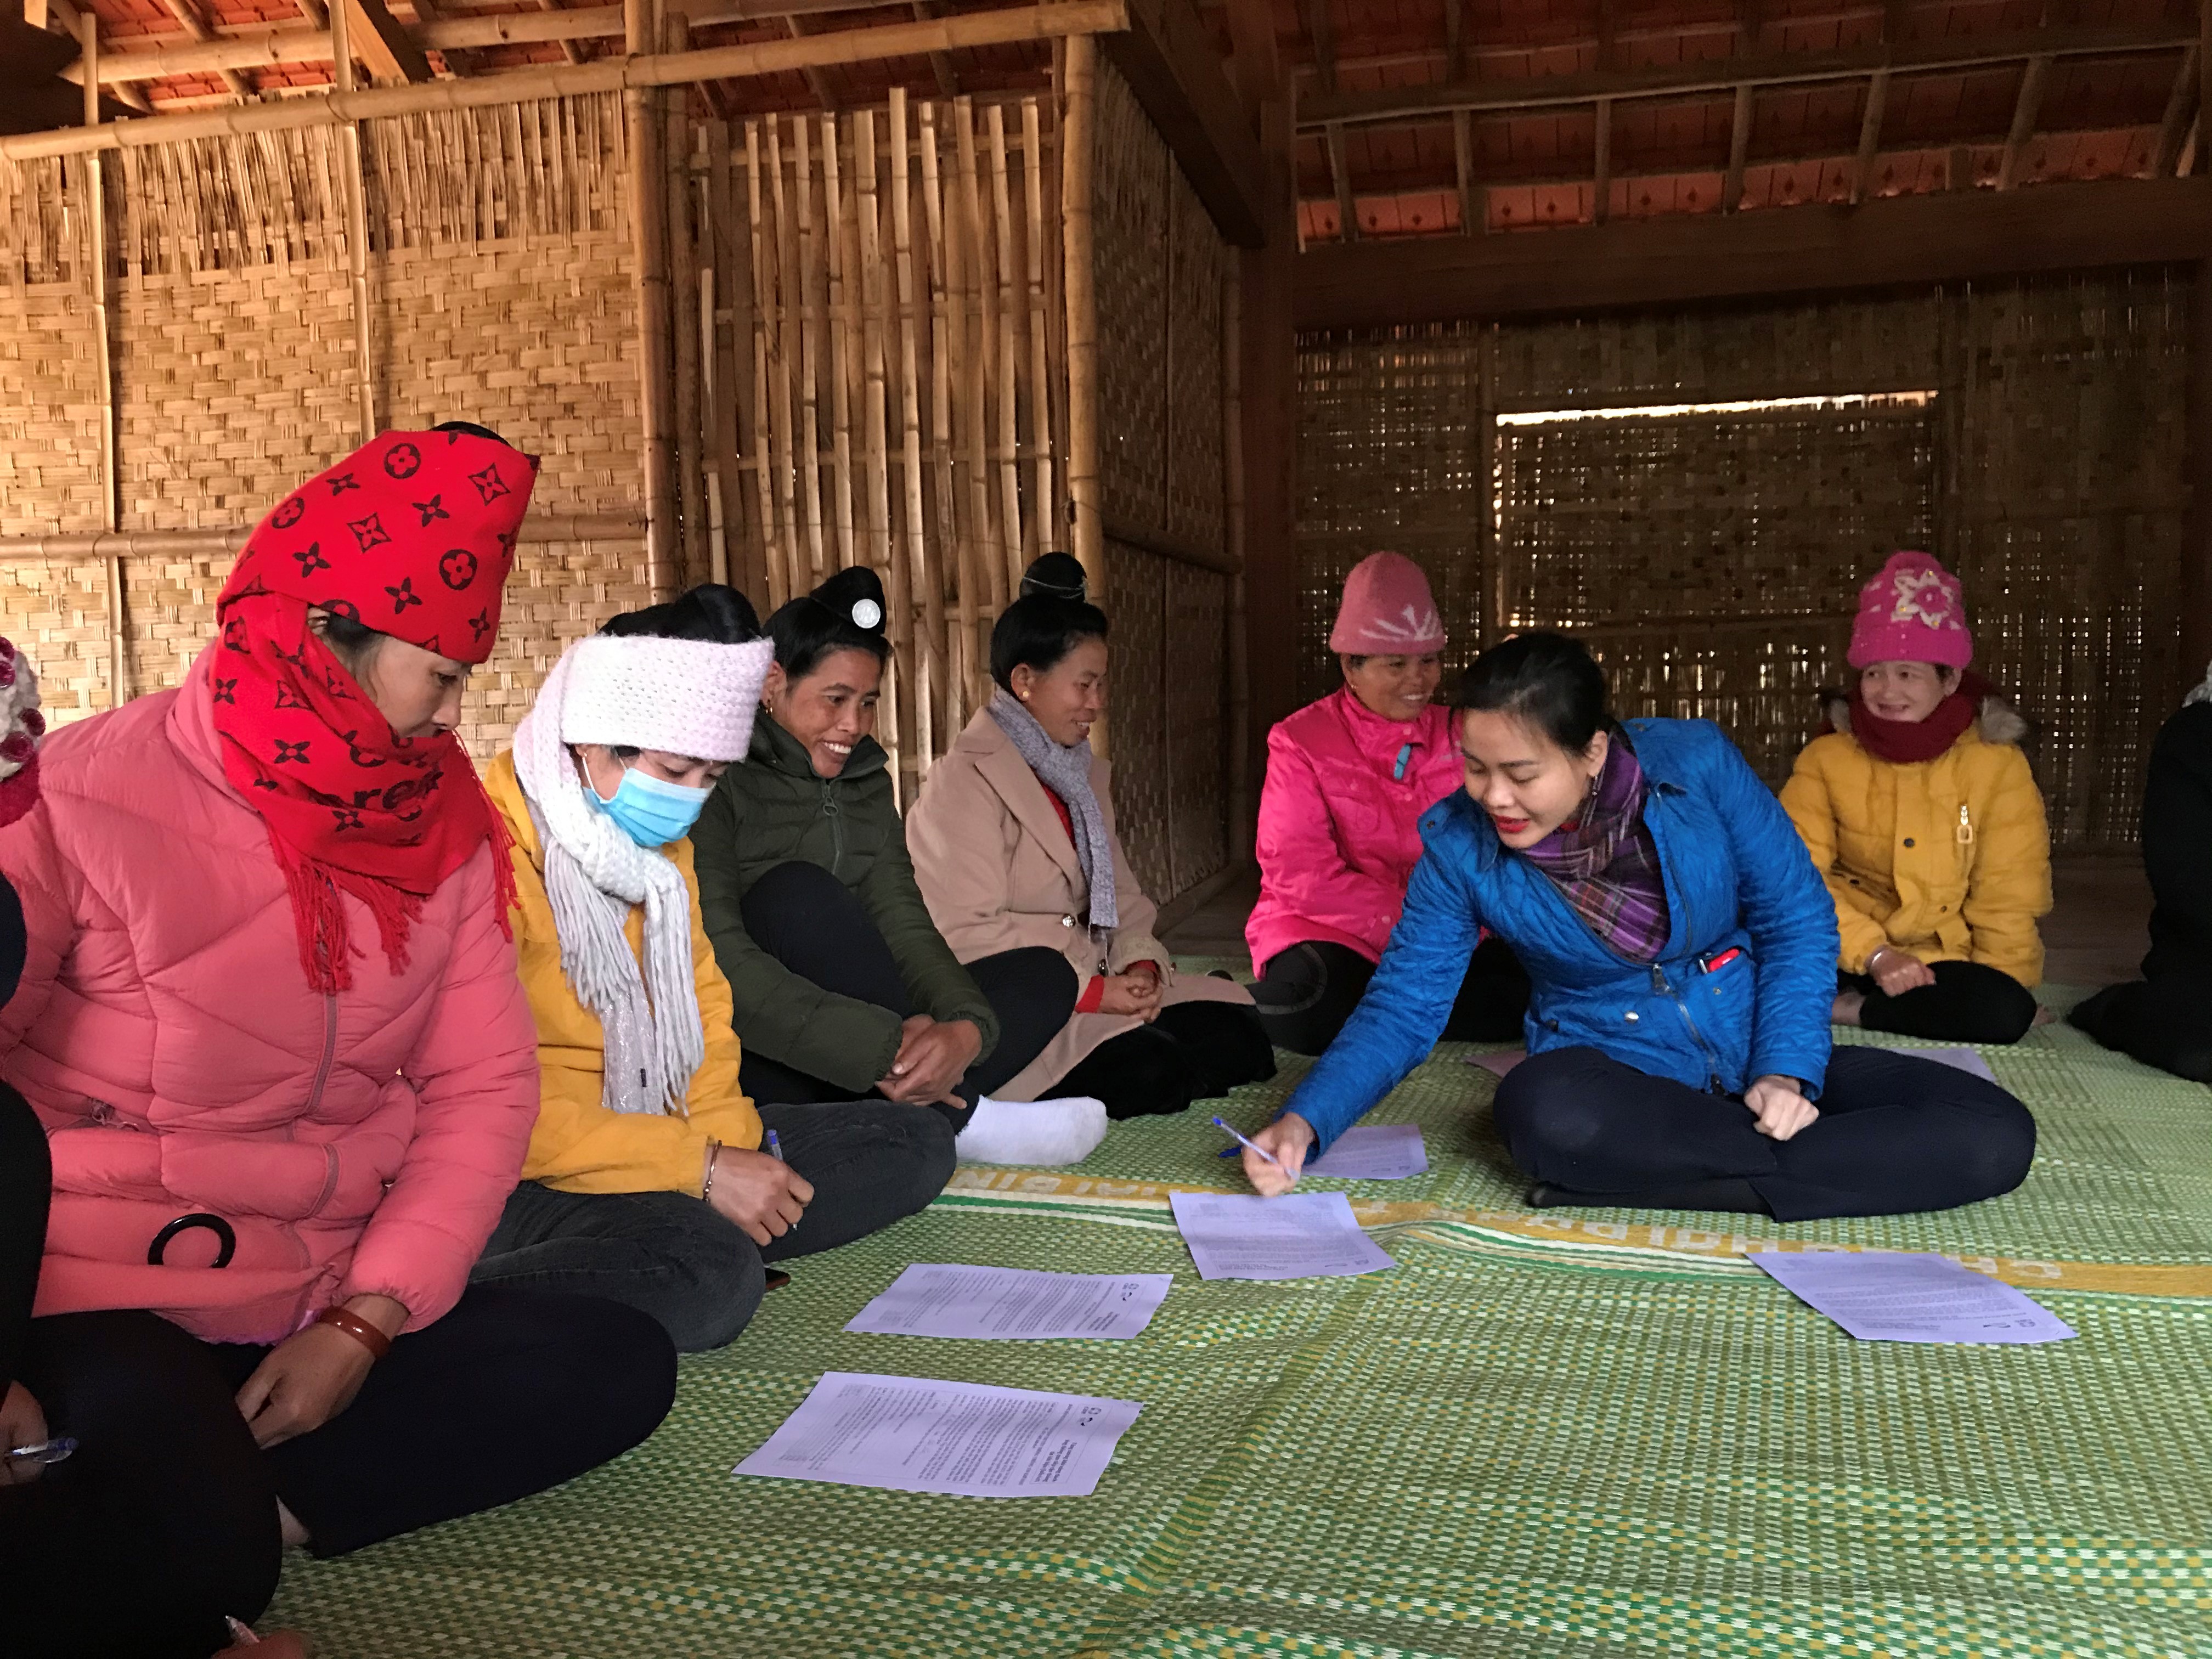 Pham Nhat Nga (pictured in blue jacket) during a field survey for a community project in Pa Khoang Commune, Dien Bien Province in 2020.